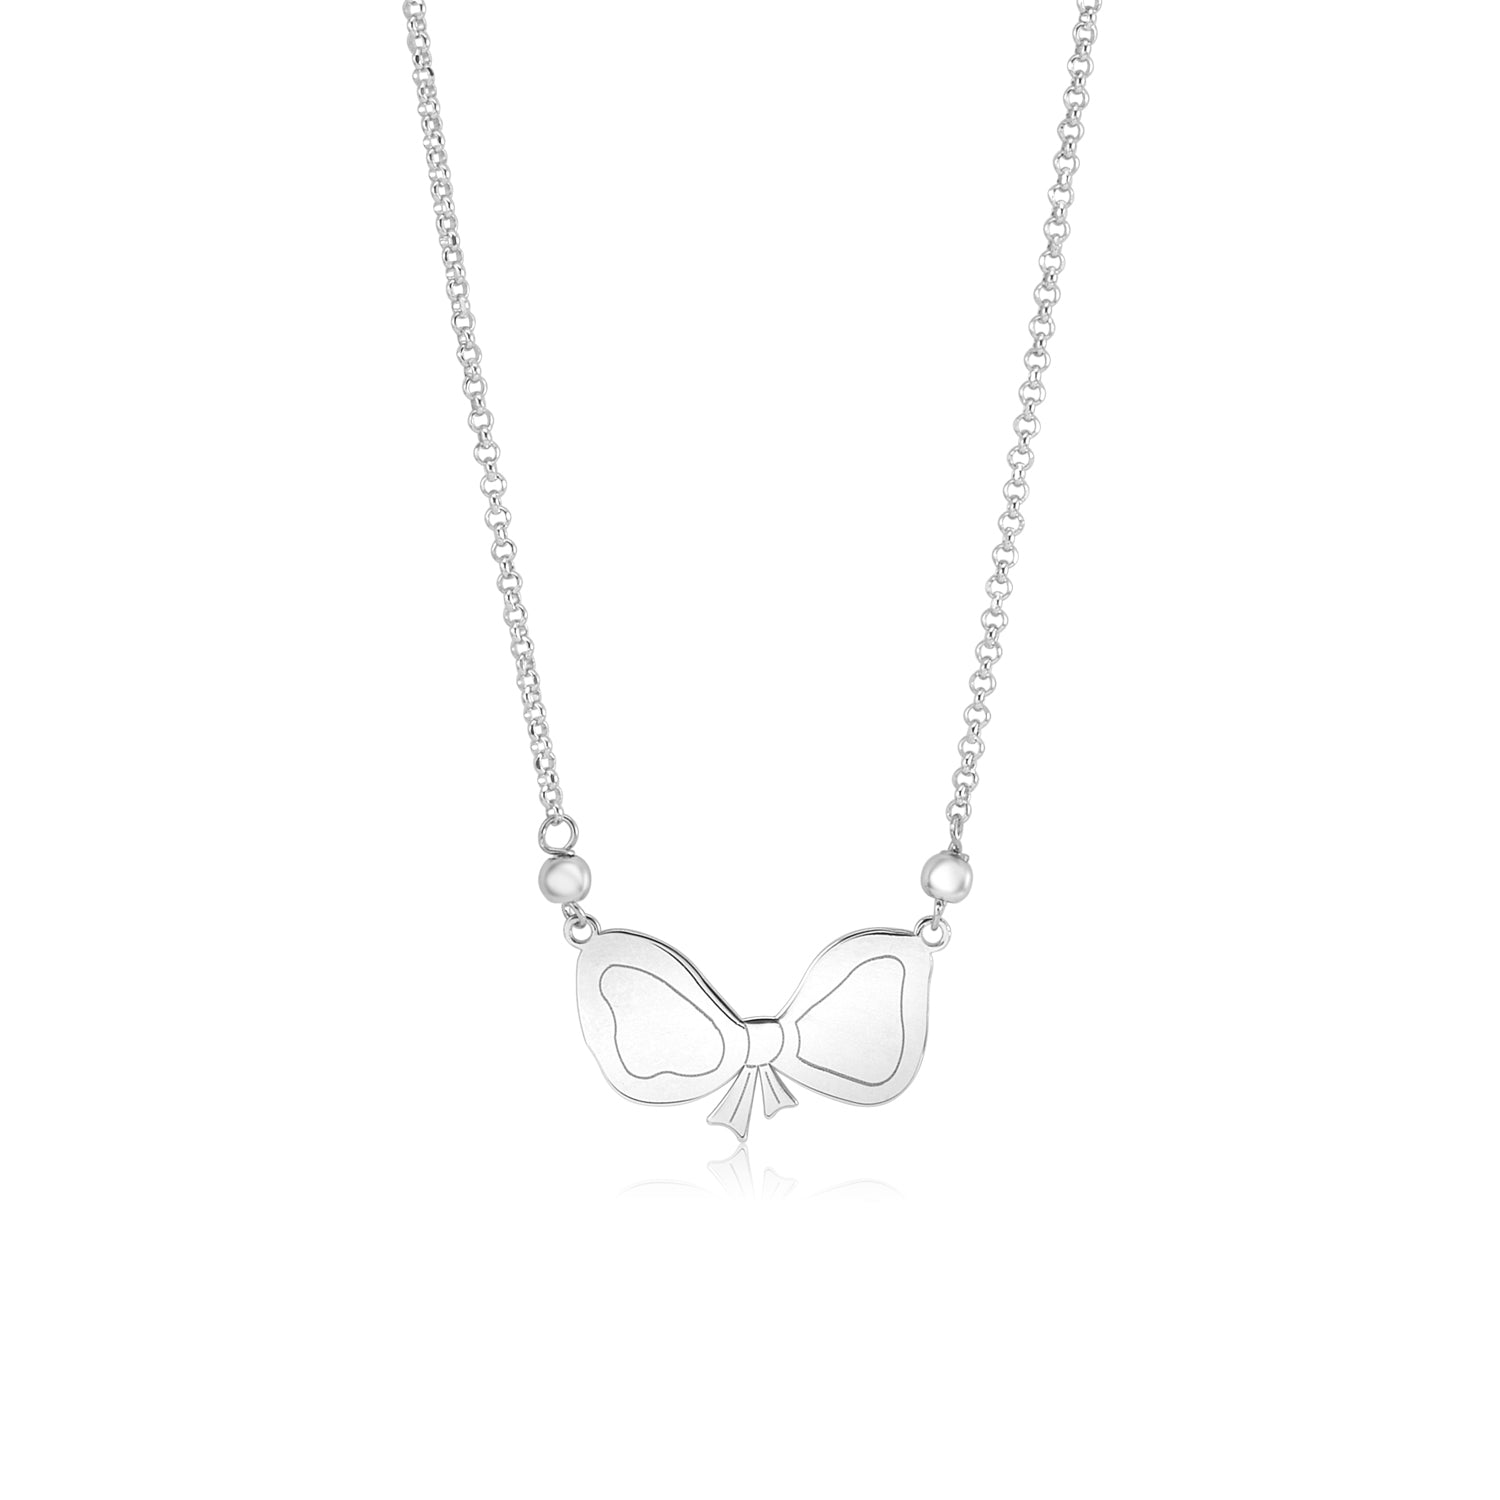 Sterling Silver Rose Gold Plated High Polished Fantasy Bow Pendant Necklace on Rolo Chain 16"